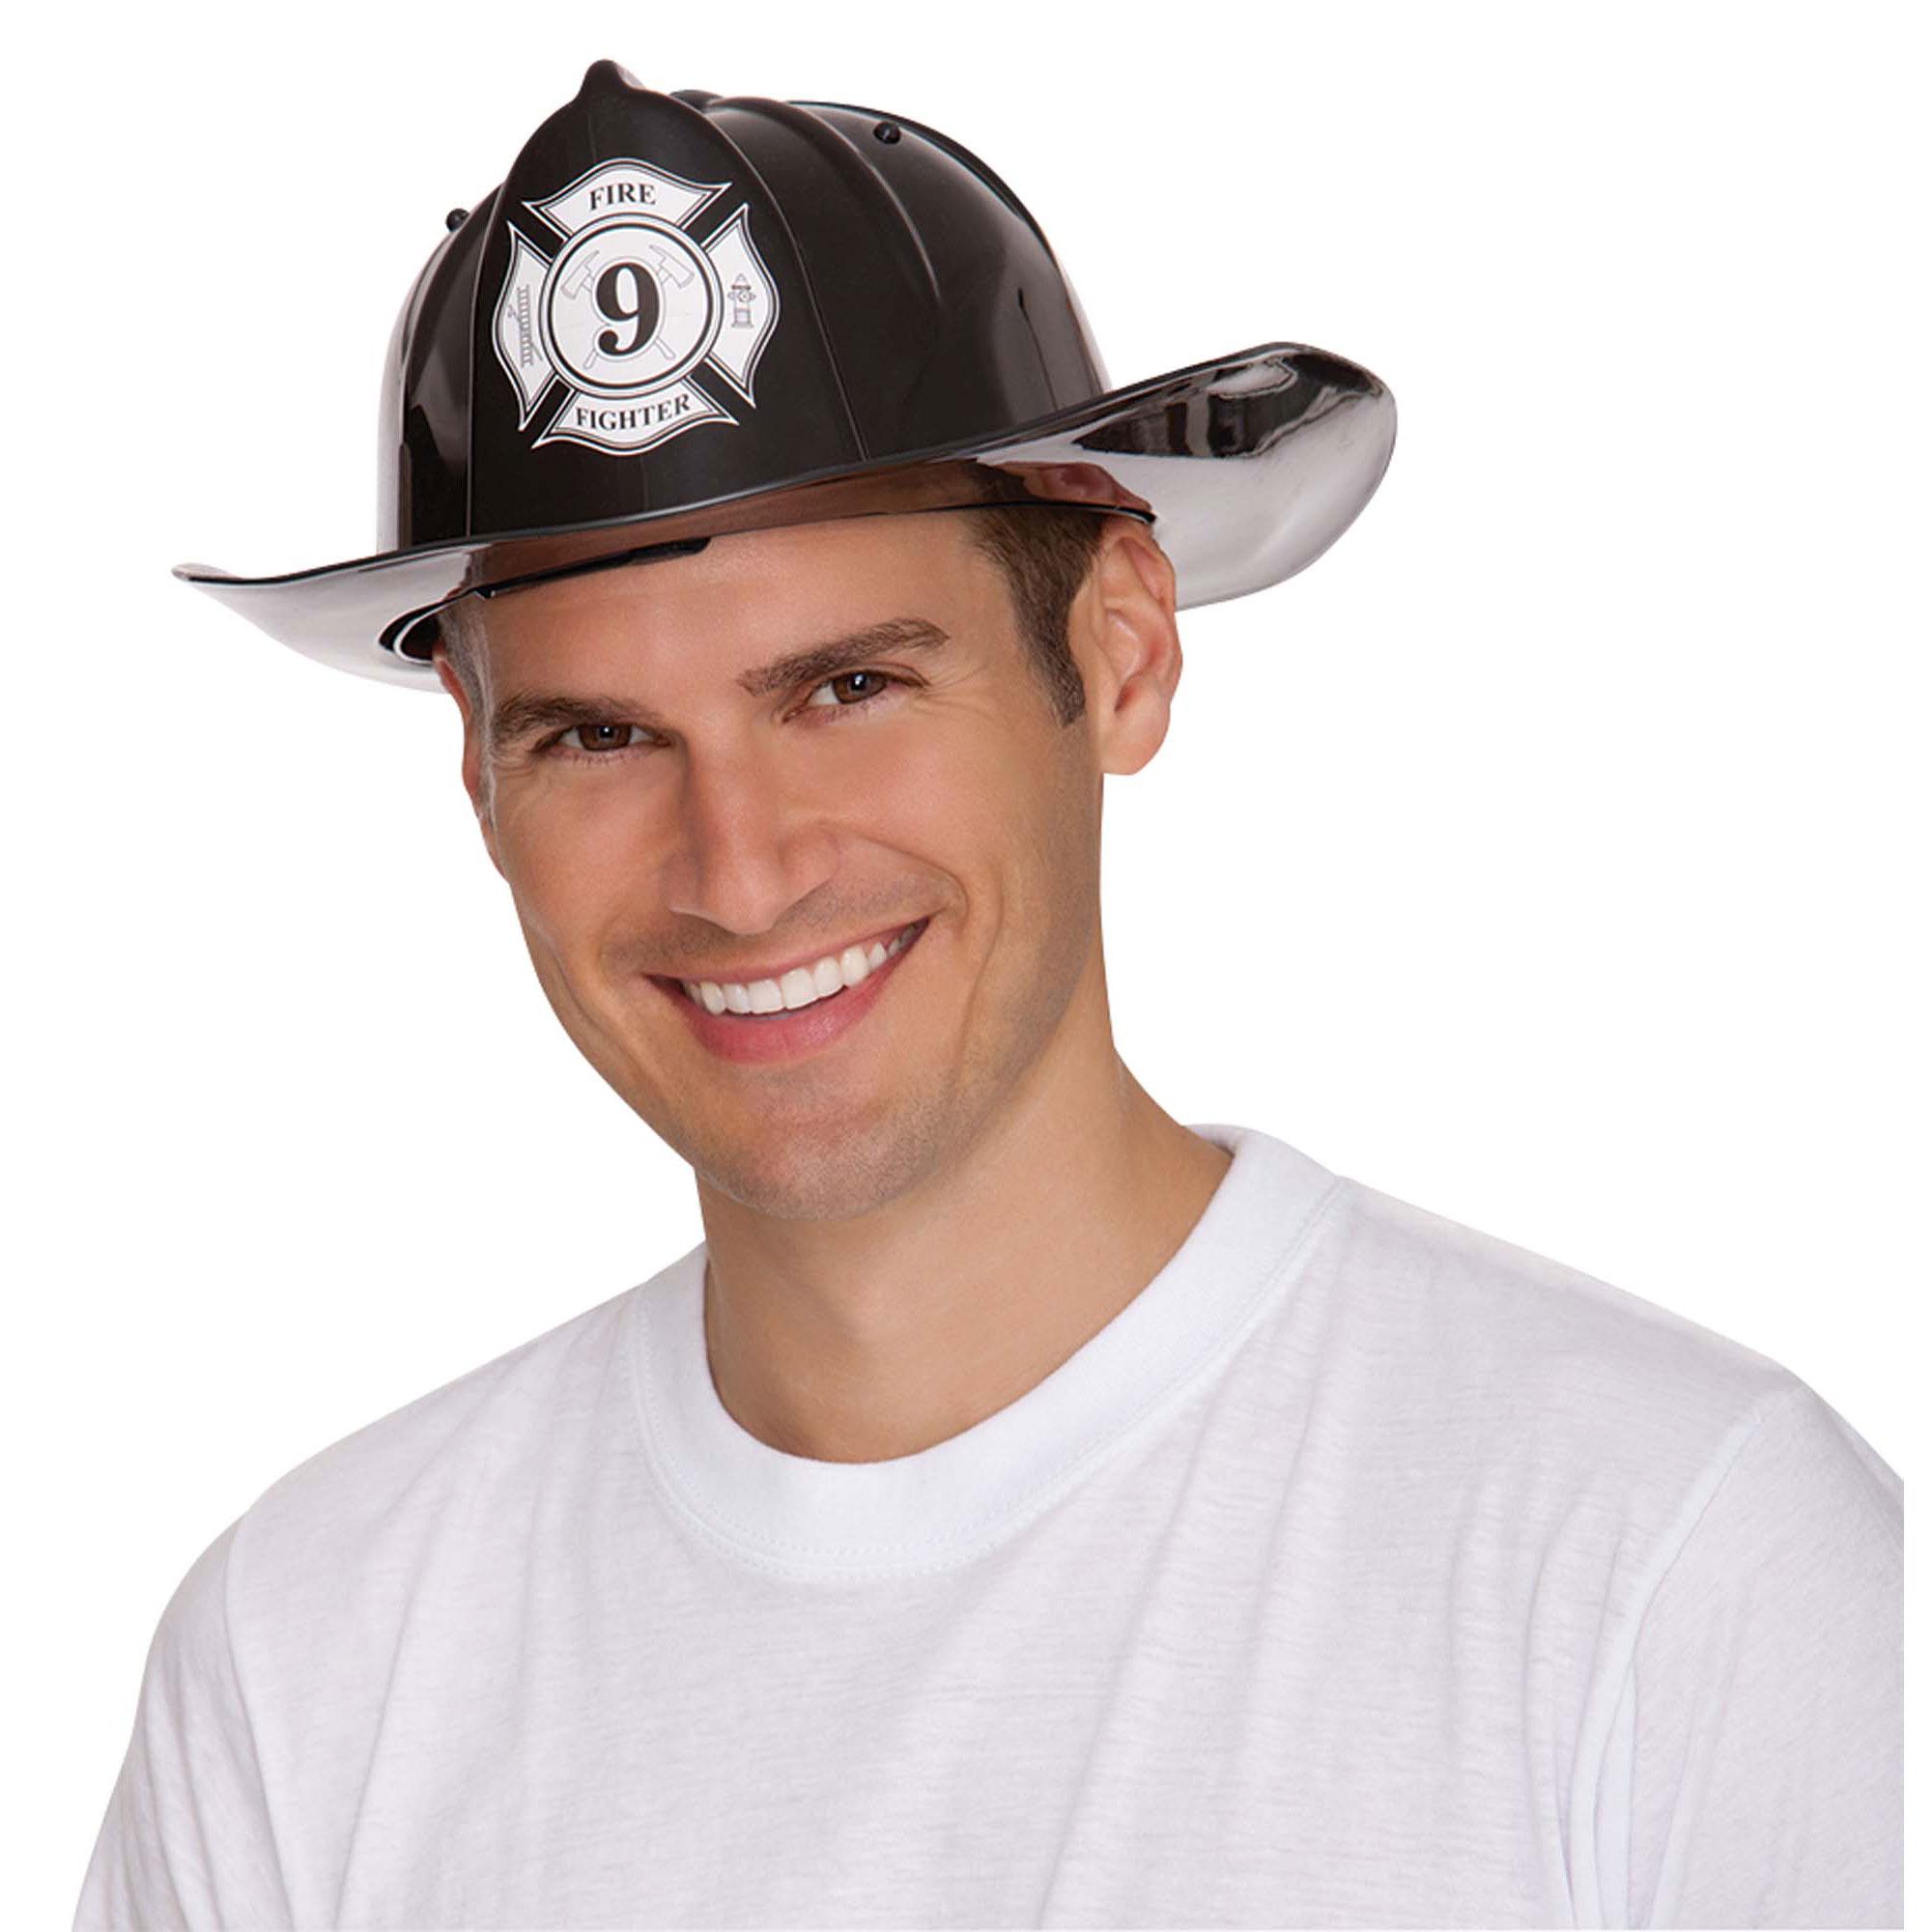 Fireman's Hat Costumes & Apparel - Party Centre